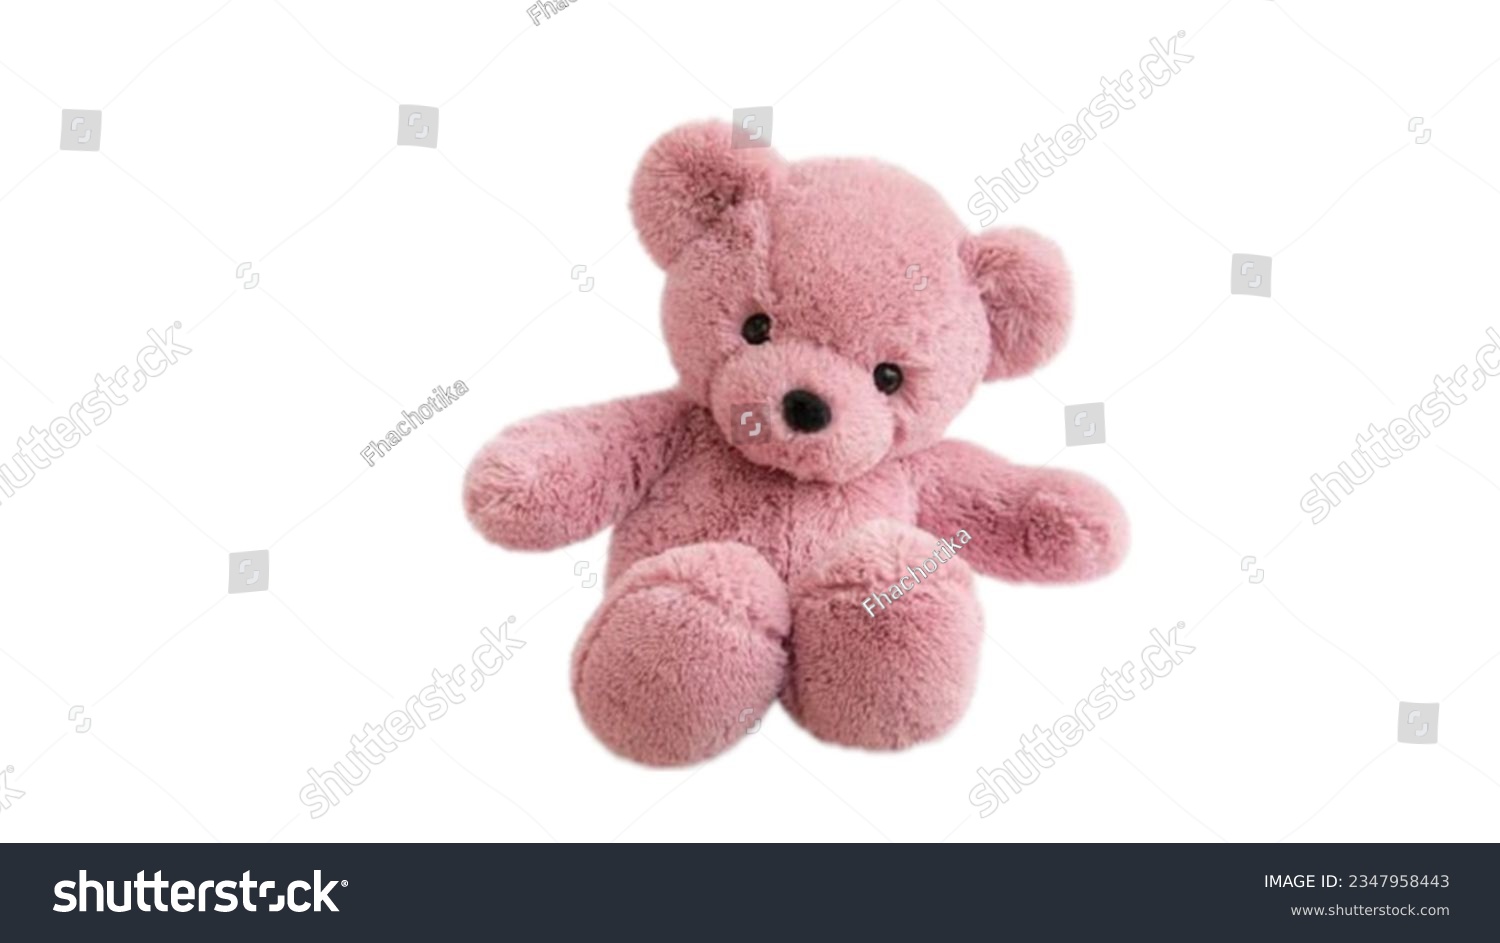 Cute pink teddy bear with white wallpaper. #2347958443